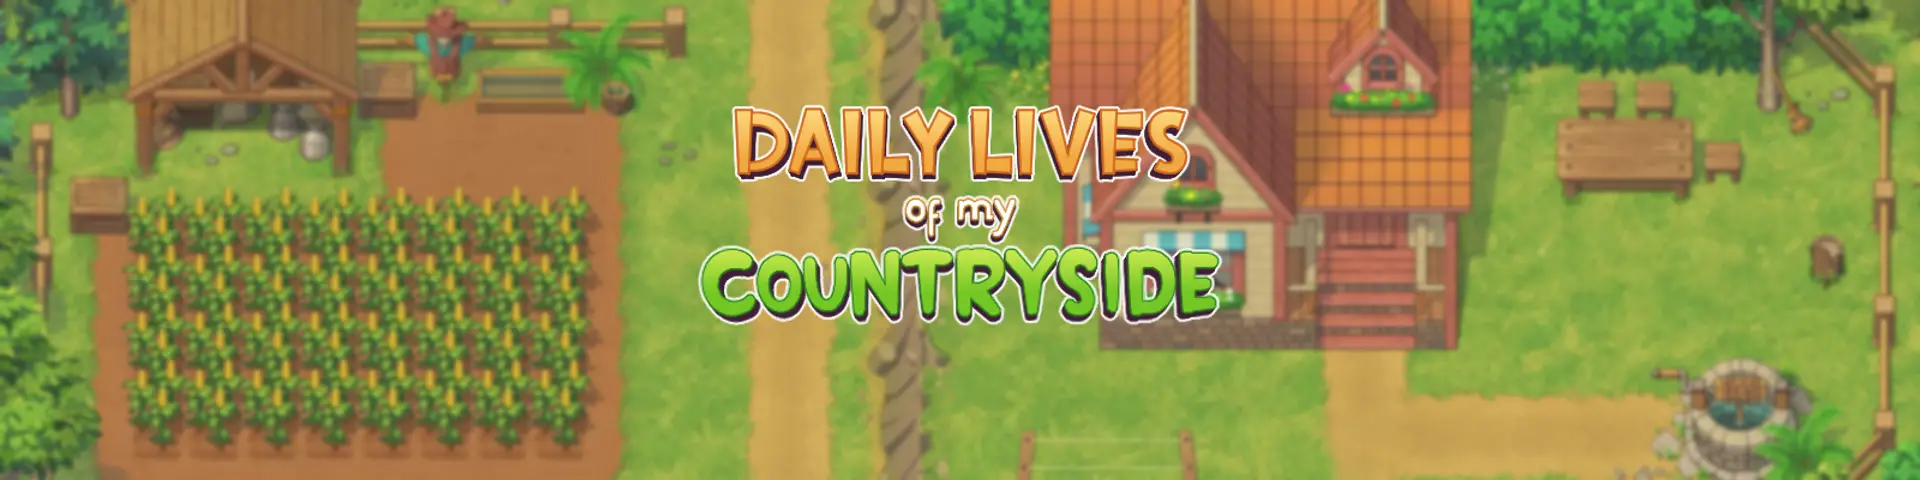 Daily lives of my countryside download